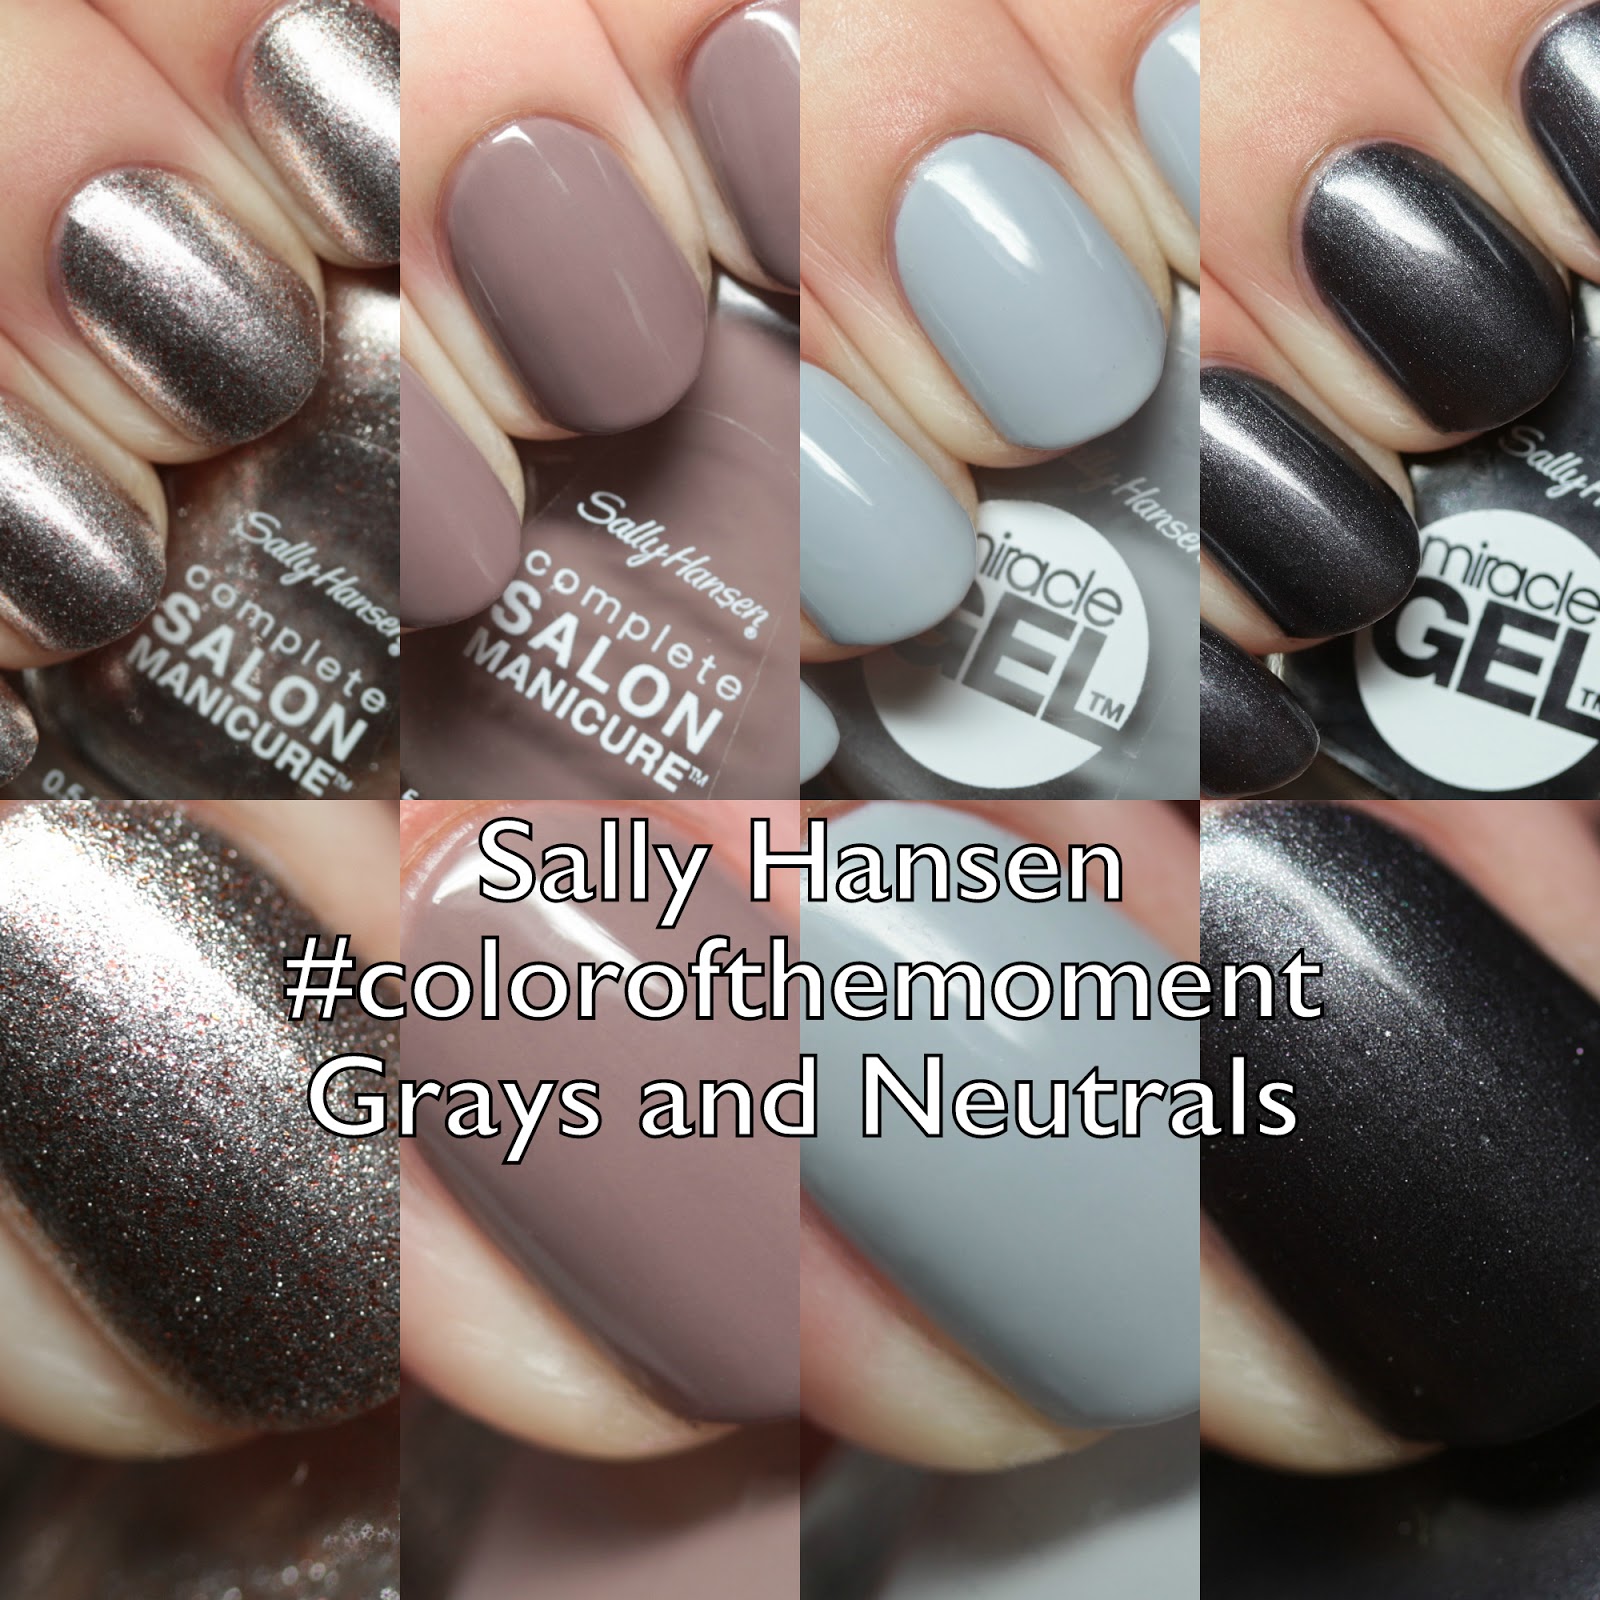 The Polished Hippy: Sally Hansen Complete Salon Manicure and Miracle Gel  #colorofthemoment Grays and Neutrals Swatches and Review